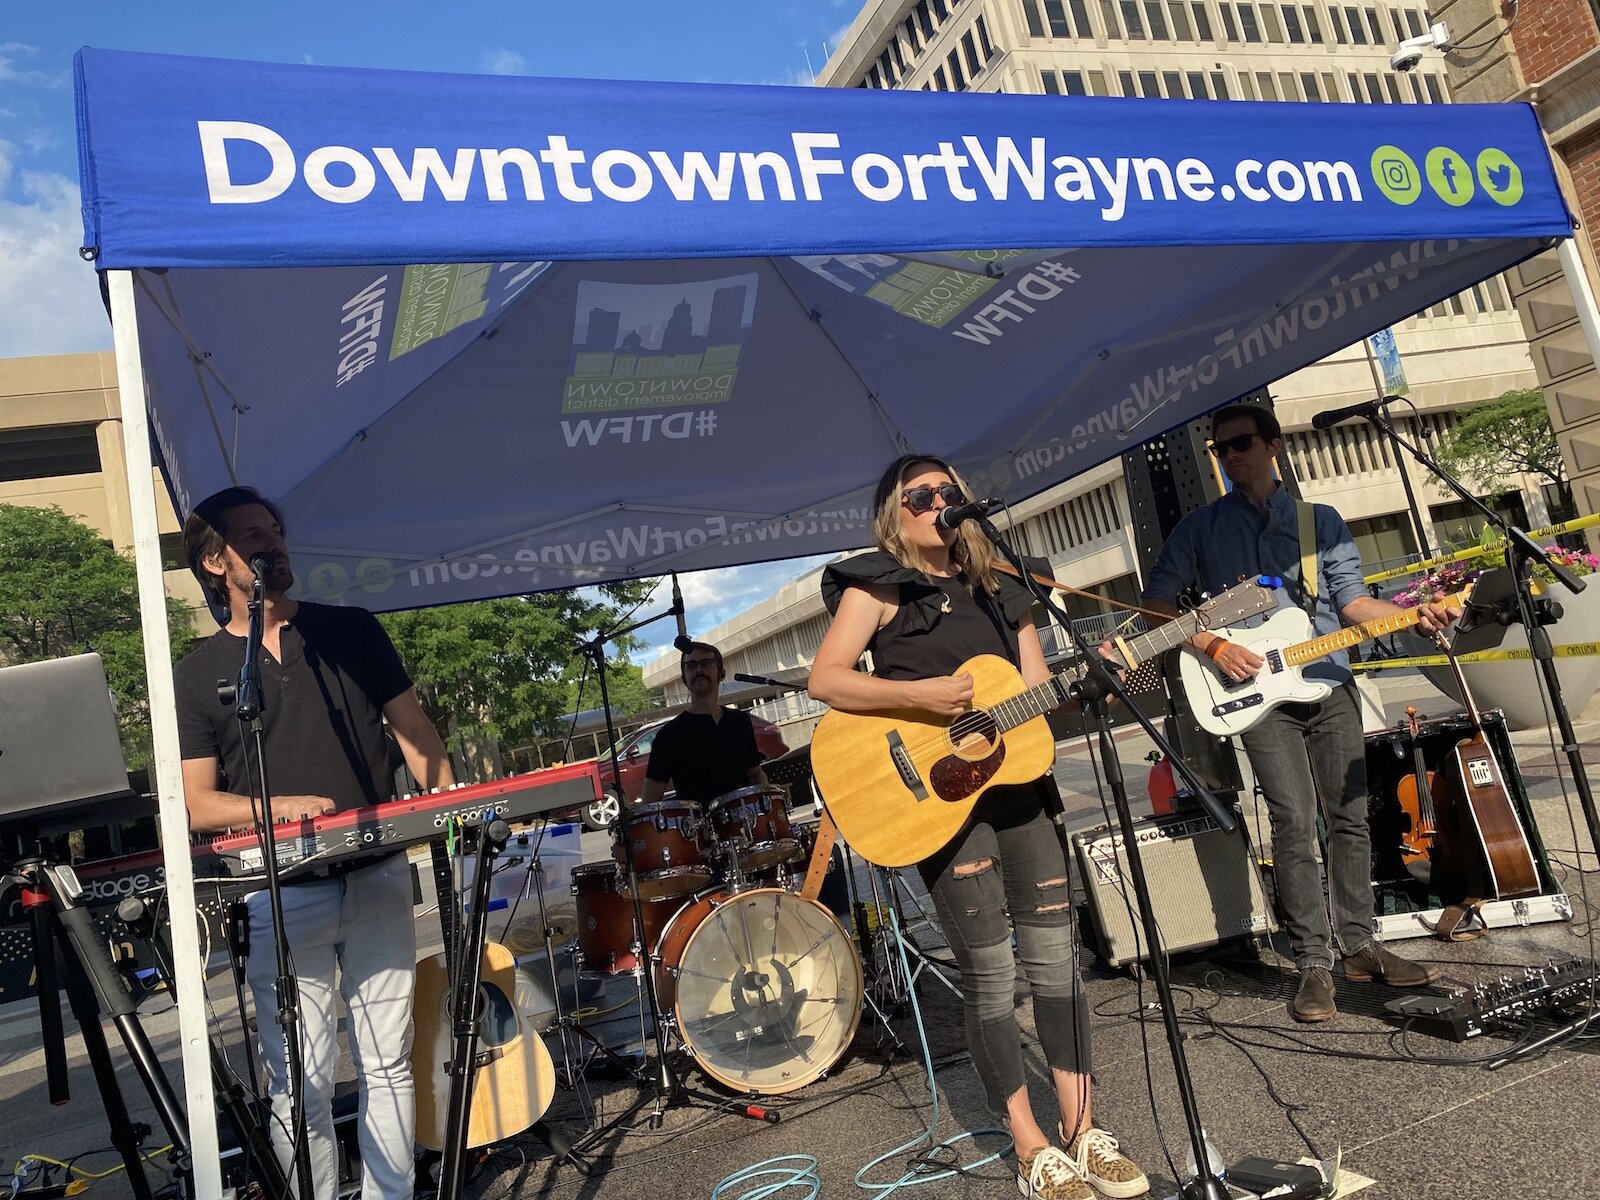 From 6-8 p.m. every Friday in June, July, and August, there's a free, live, outdoor concert on The Landing courtesy of Downtown Live!